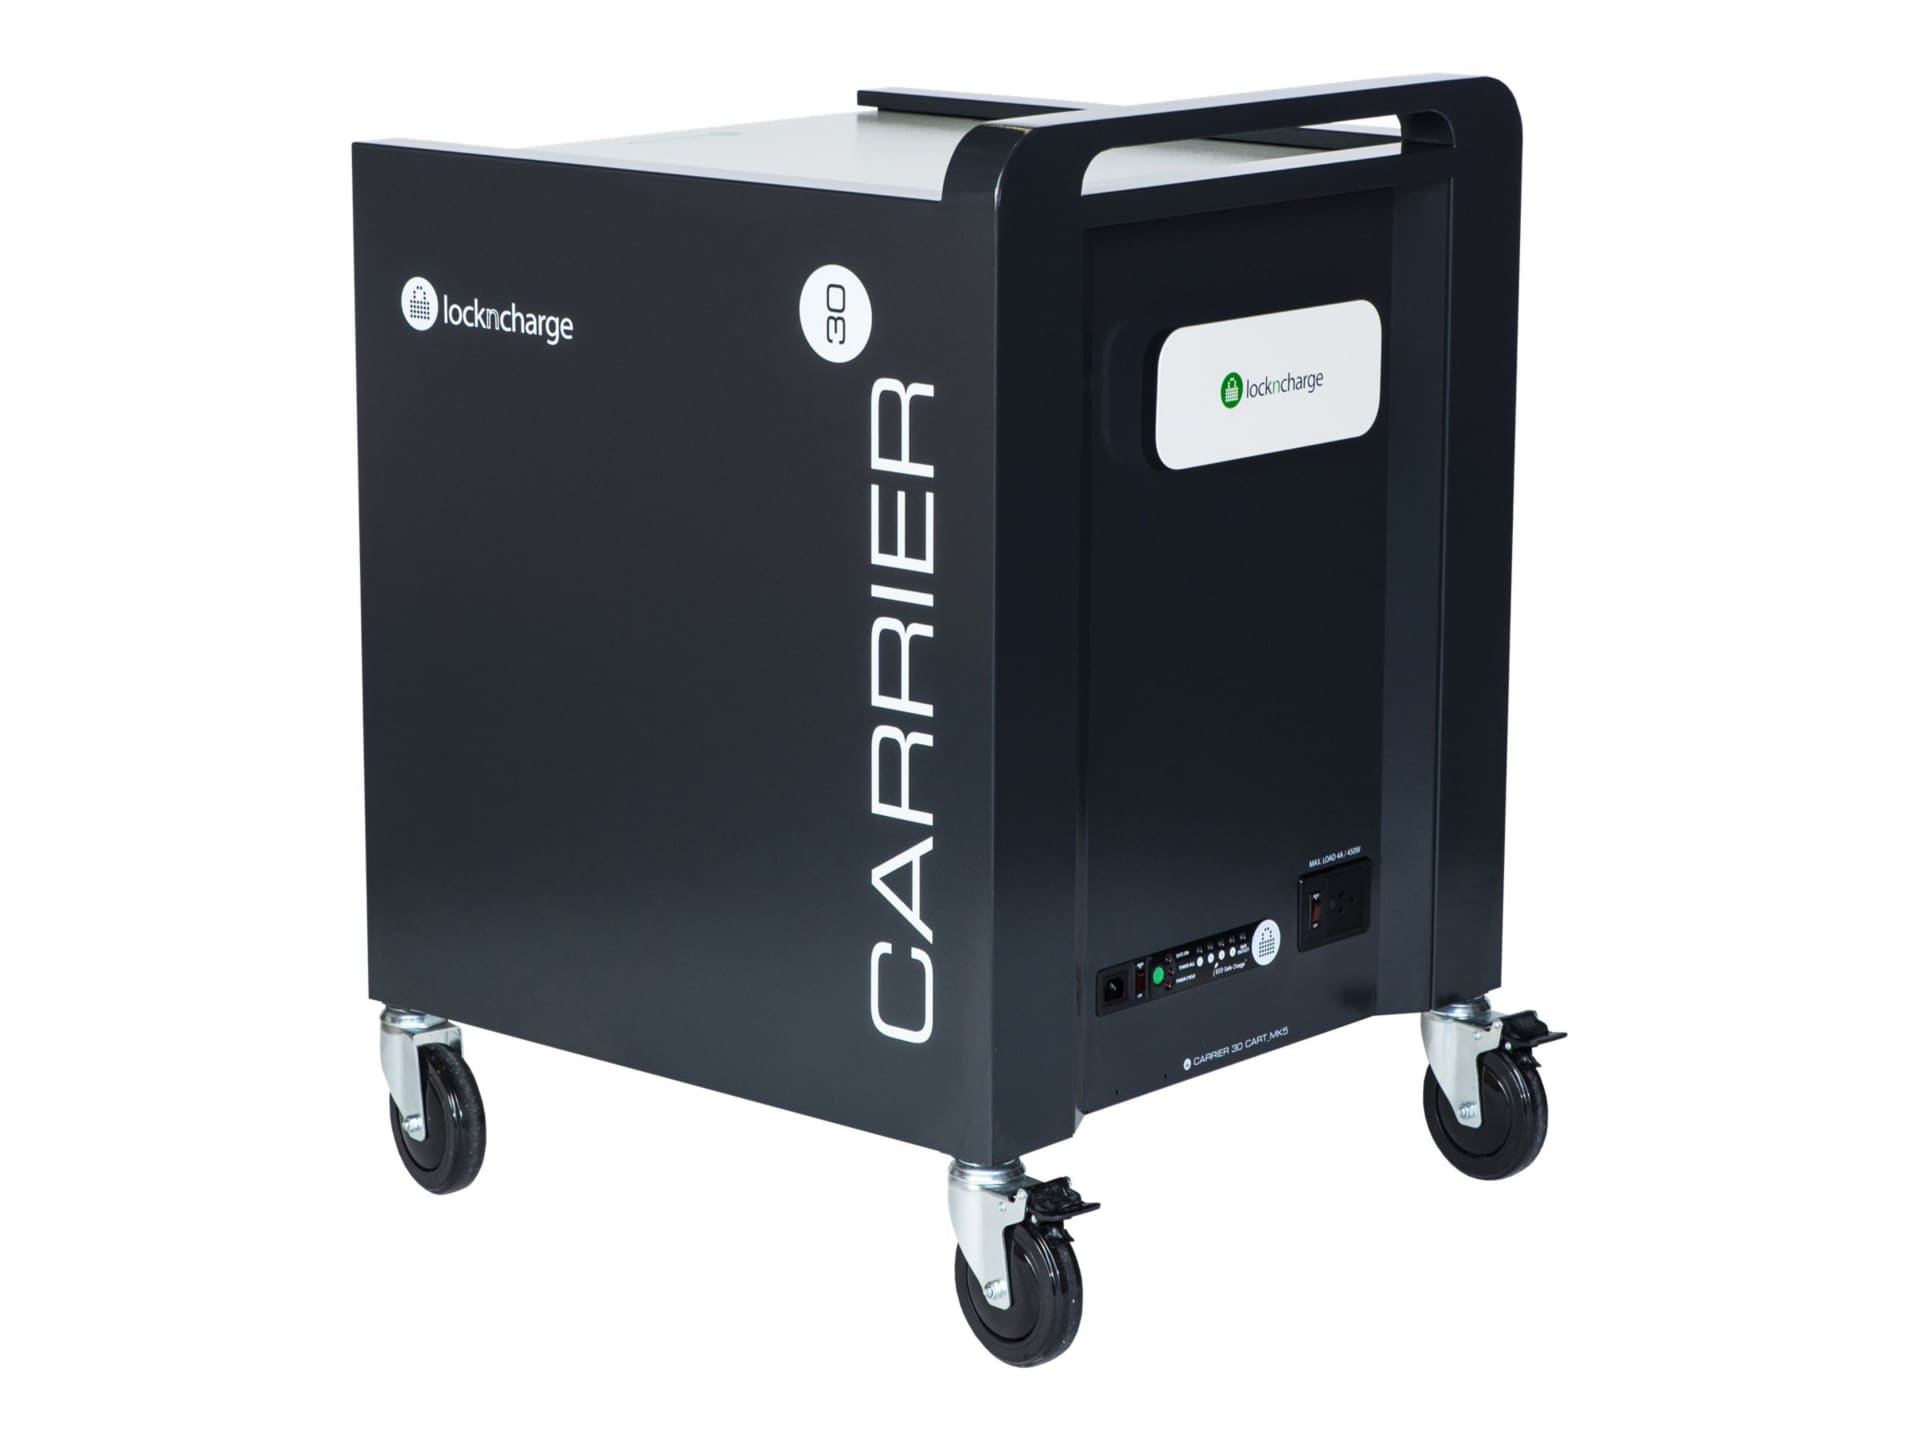 LocknCharge Carrier 30 - cart - for 30 tablets / notebooks